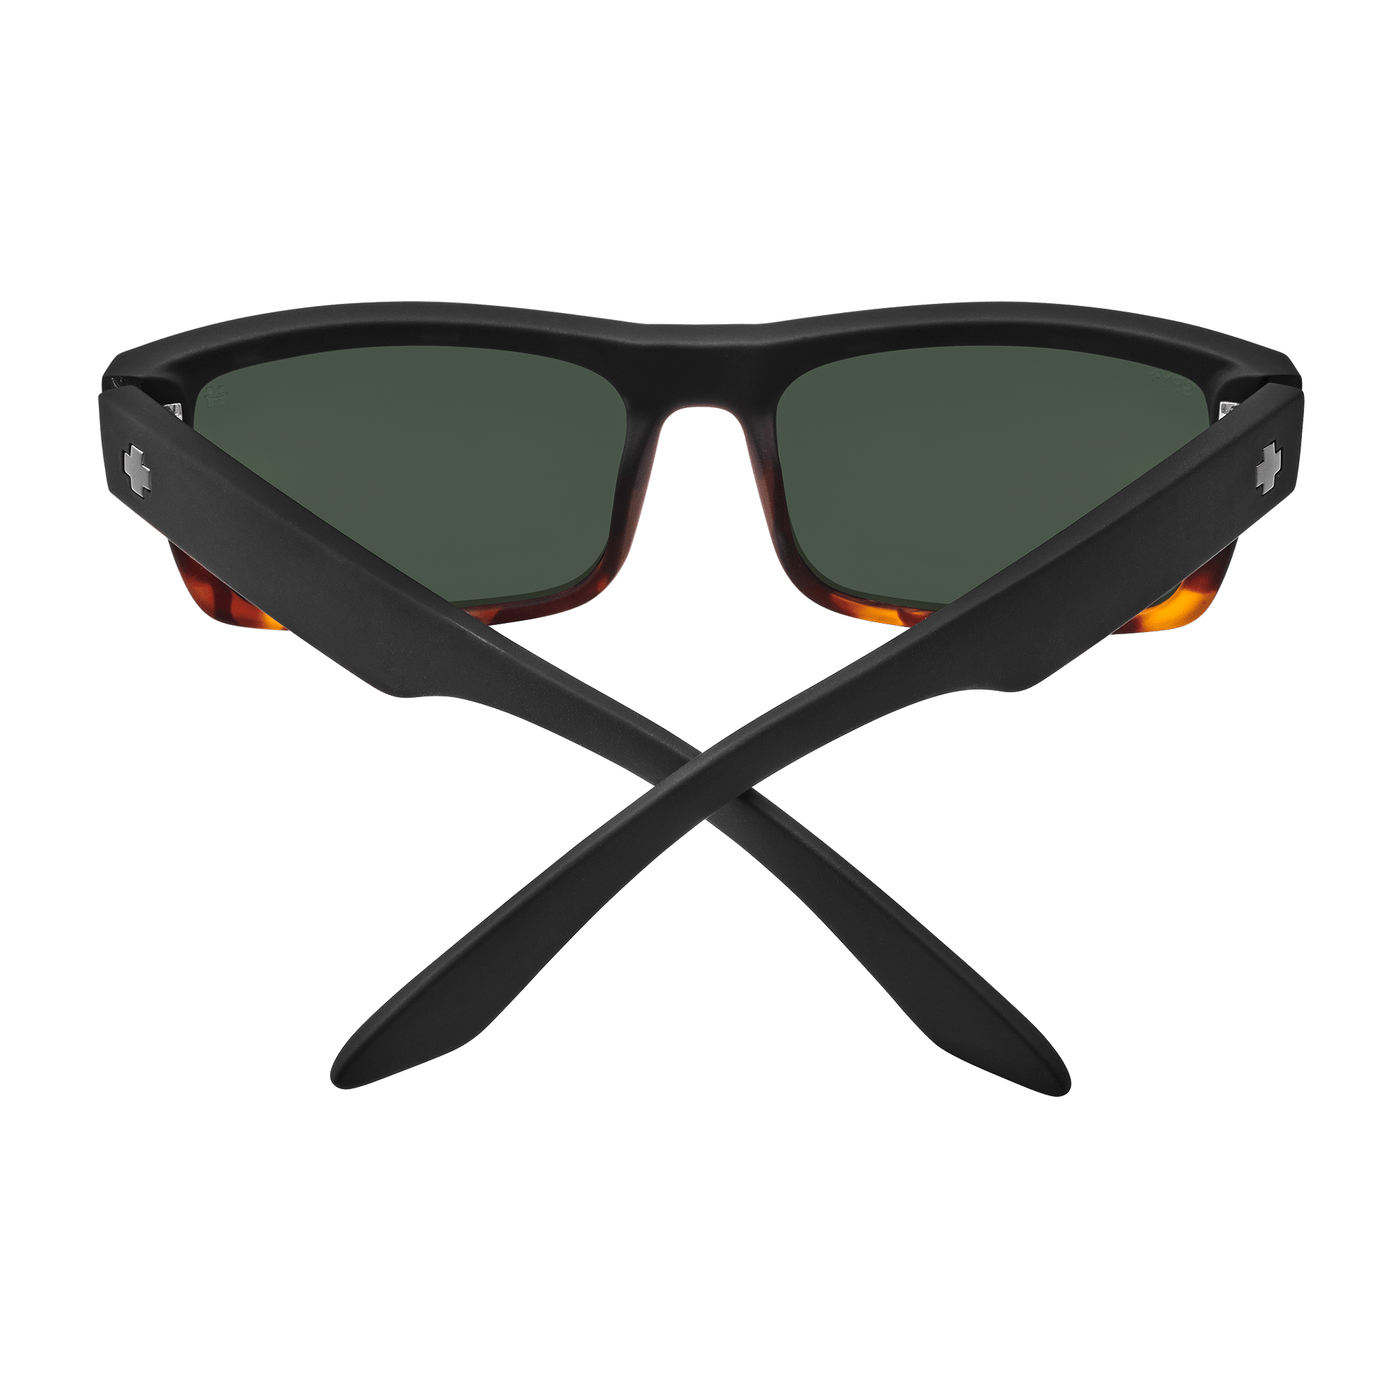 rectangle sunglasses for men and women